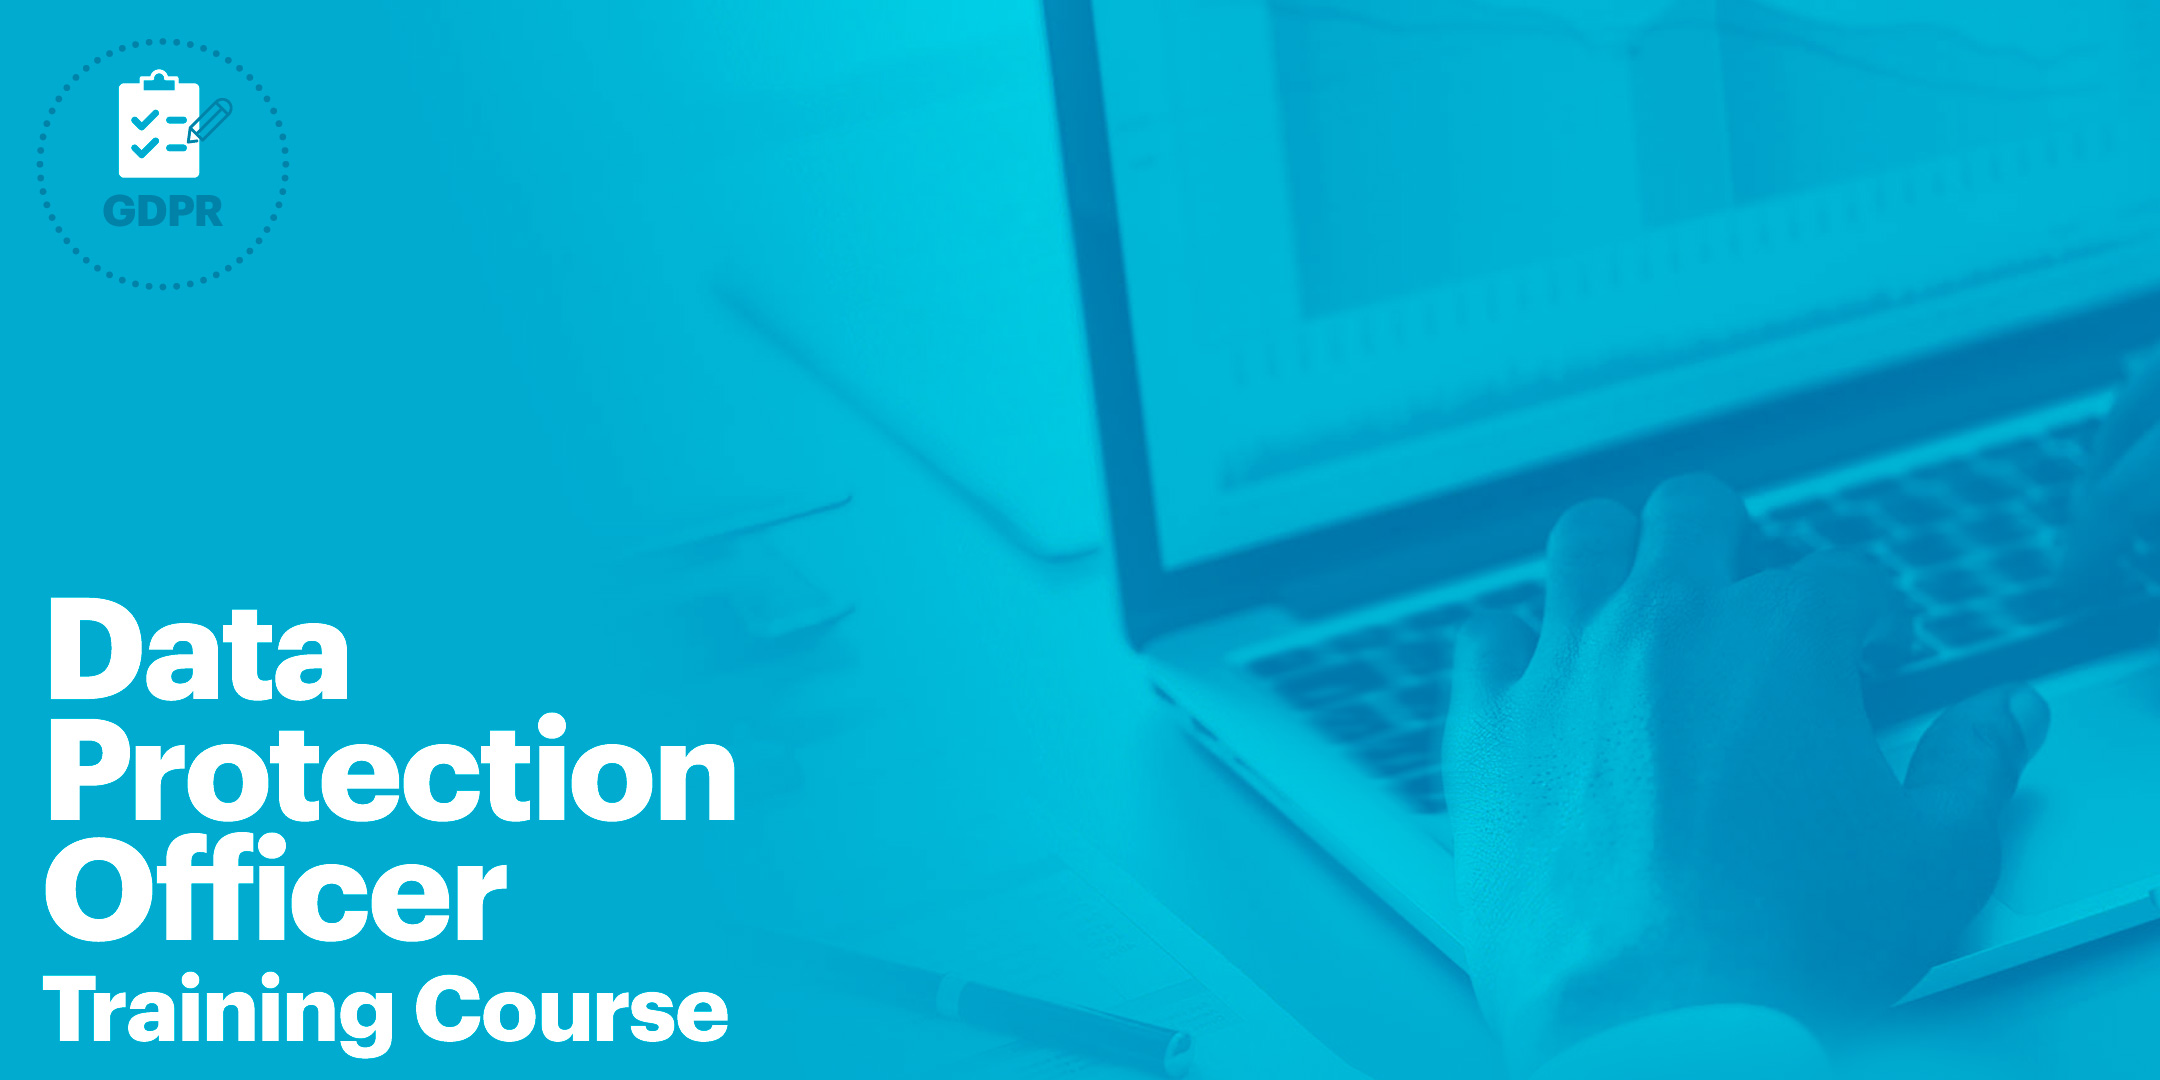 Data Protection Officer Training Course